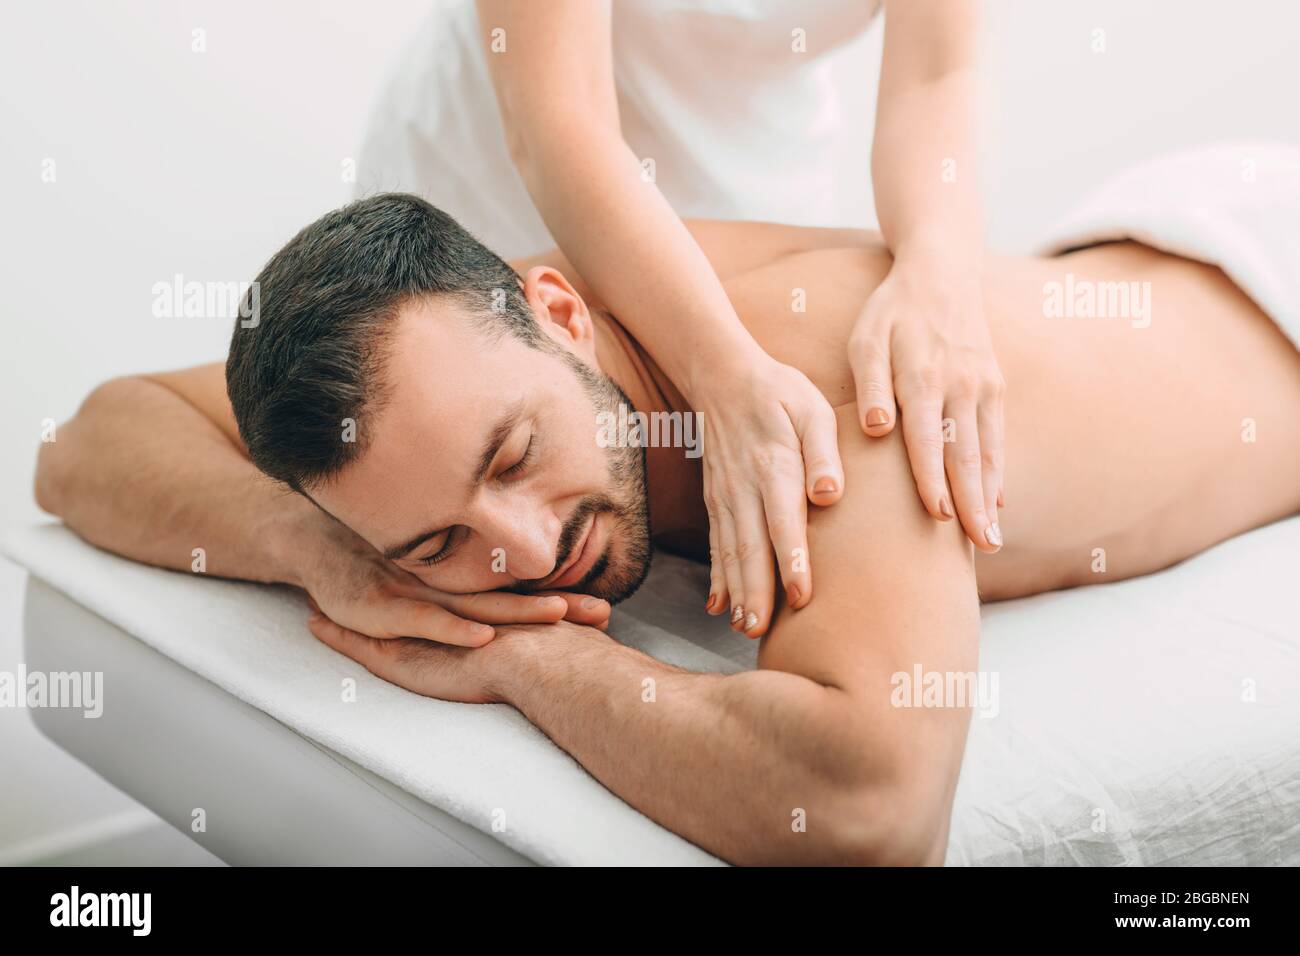 handsome man enjoying a back massage, weekend spa. mixed race man relaxes while back massage Stock Photo